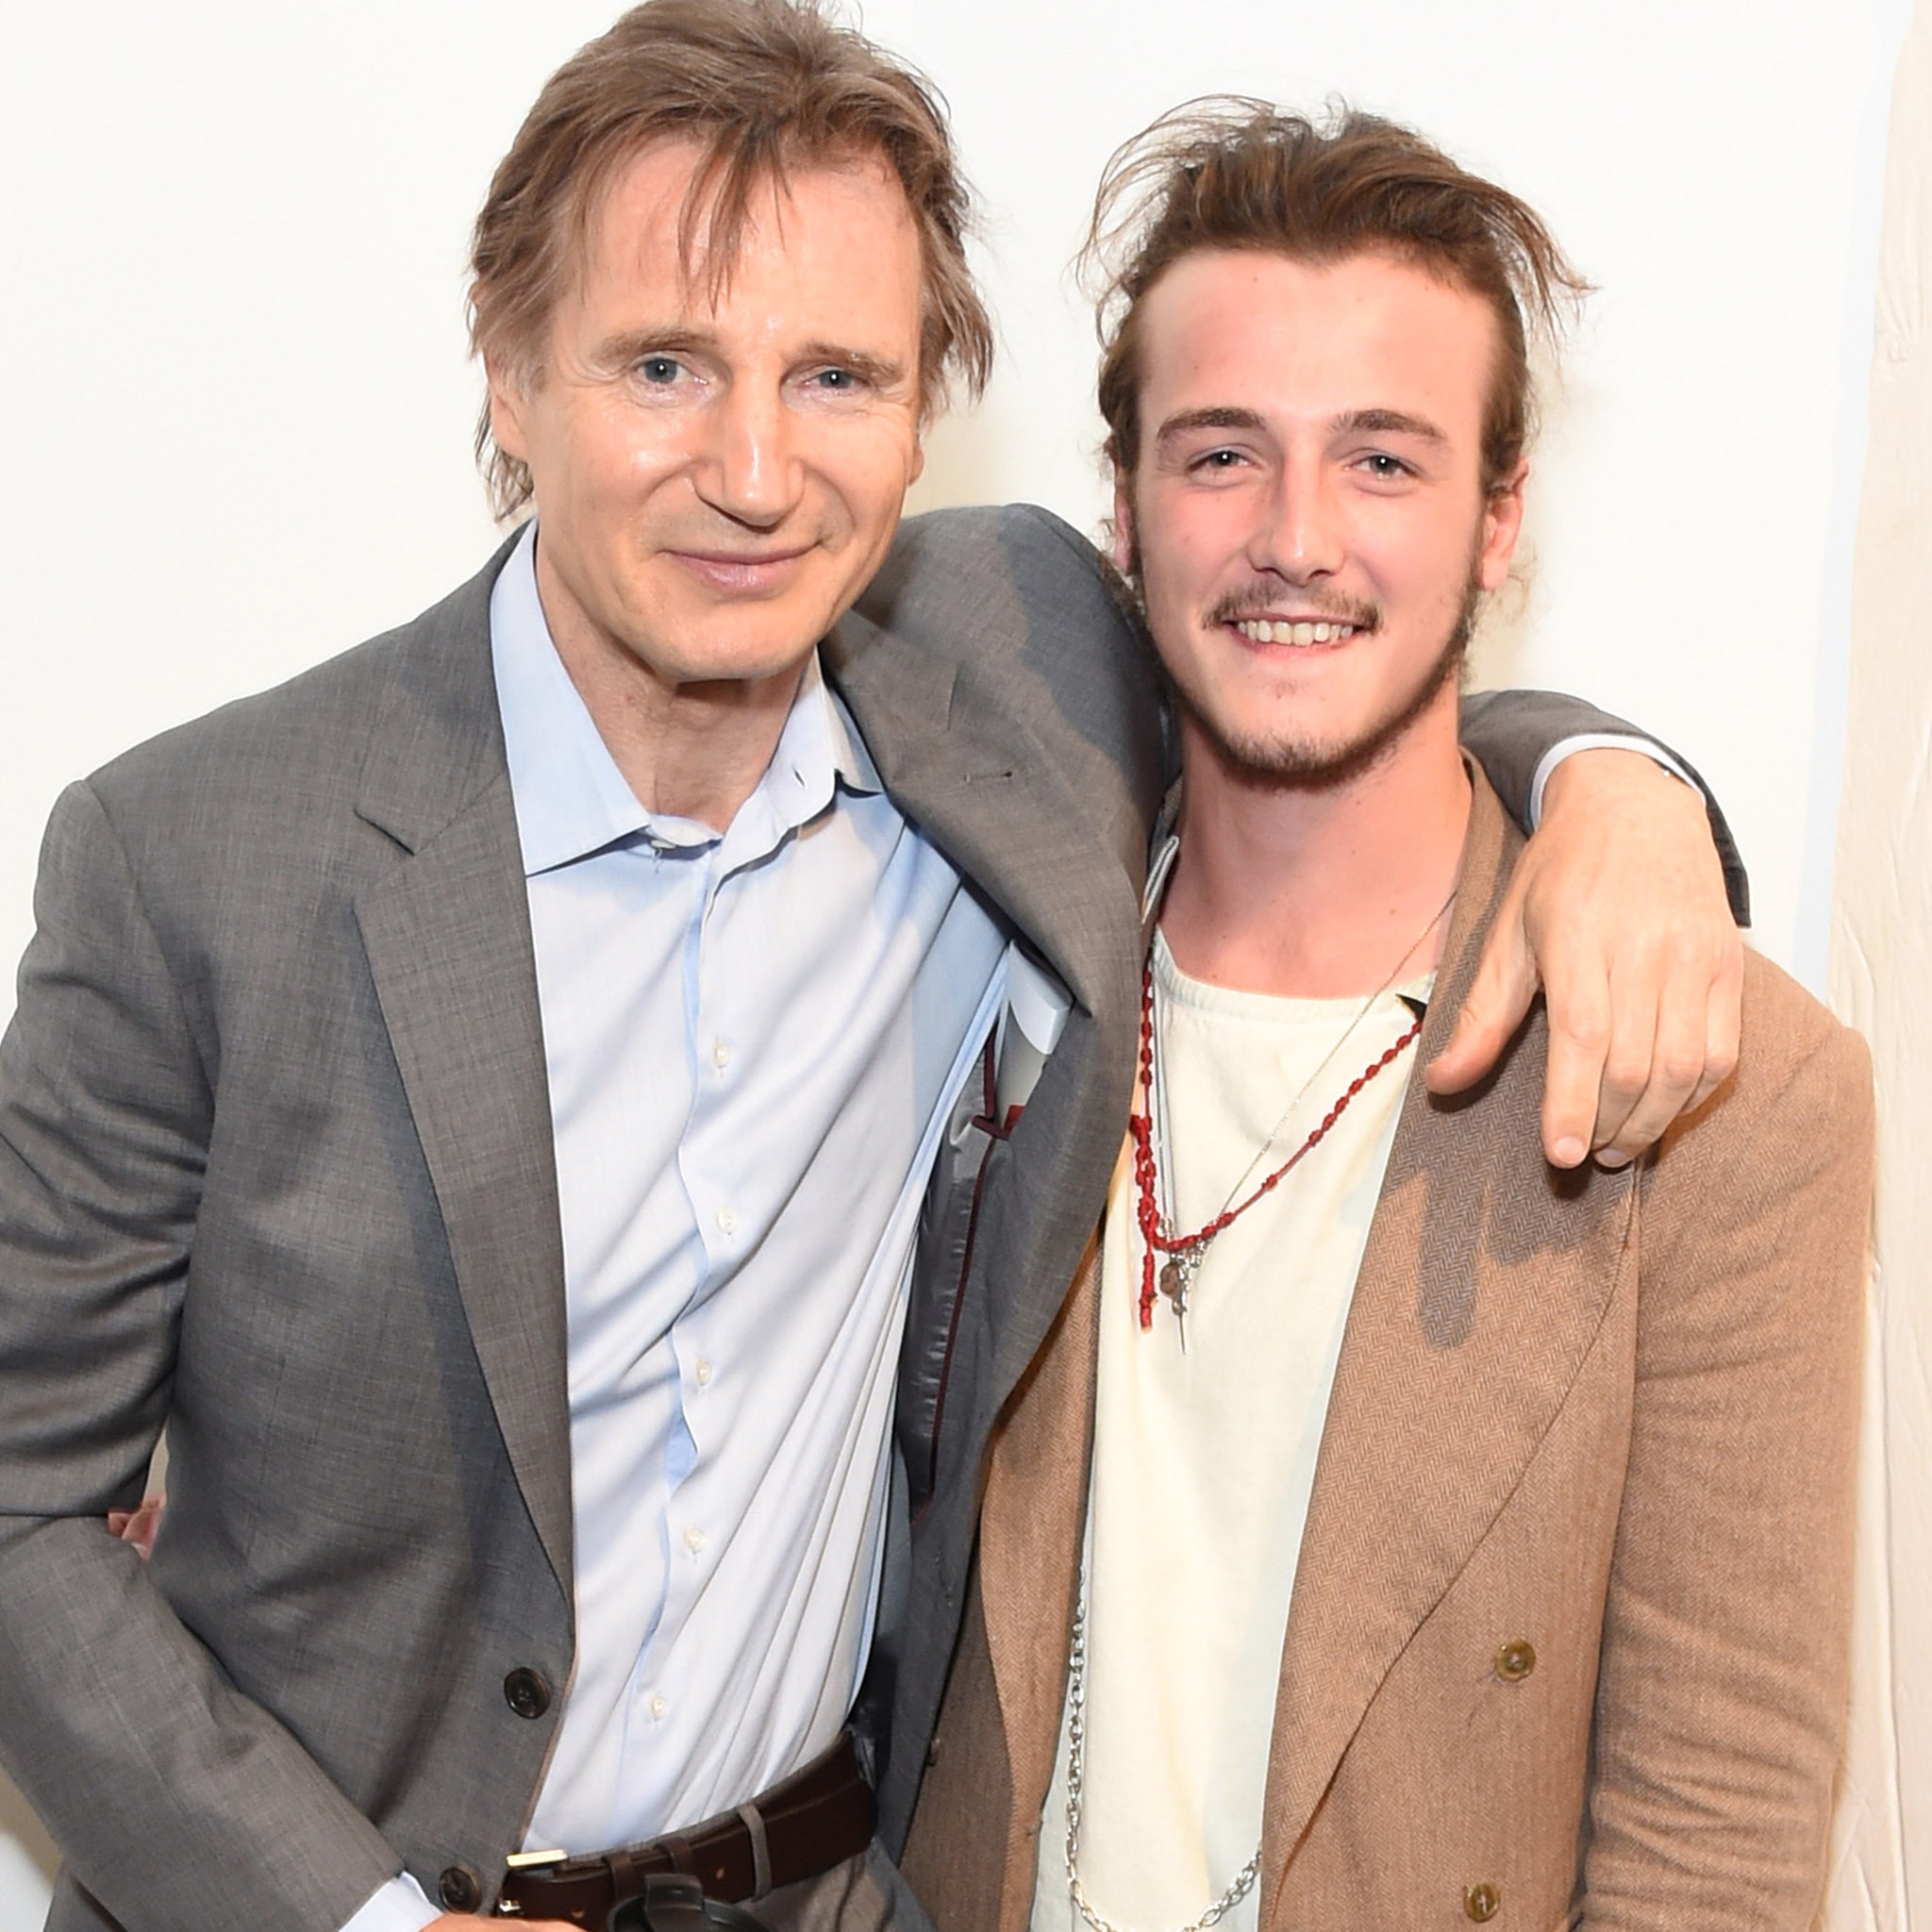 Liam Neeson Reacts To Son Micheal Changing Last Name To Richardson To Honor Late Mom Natasha